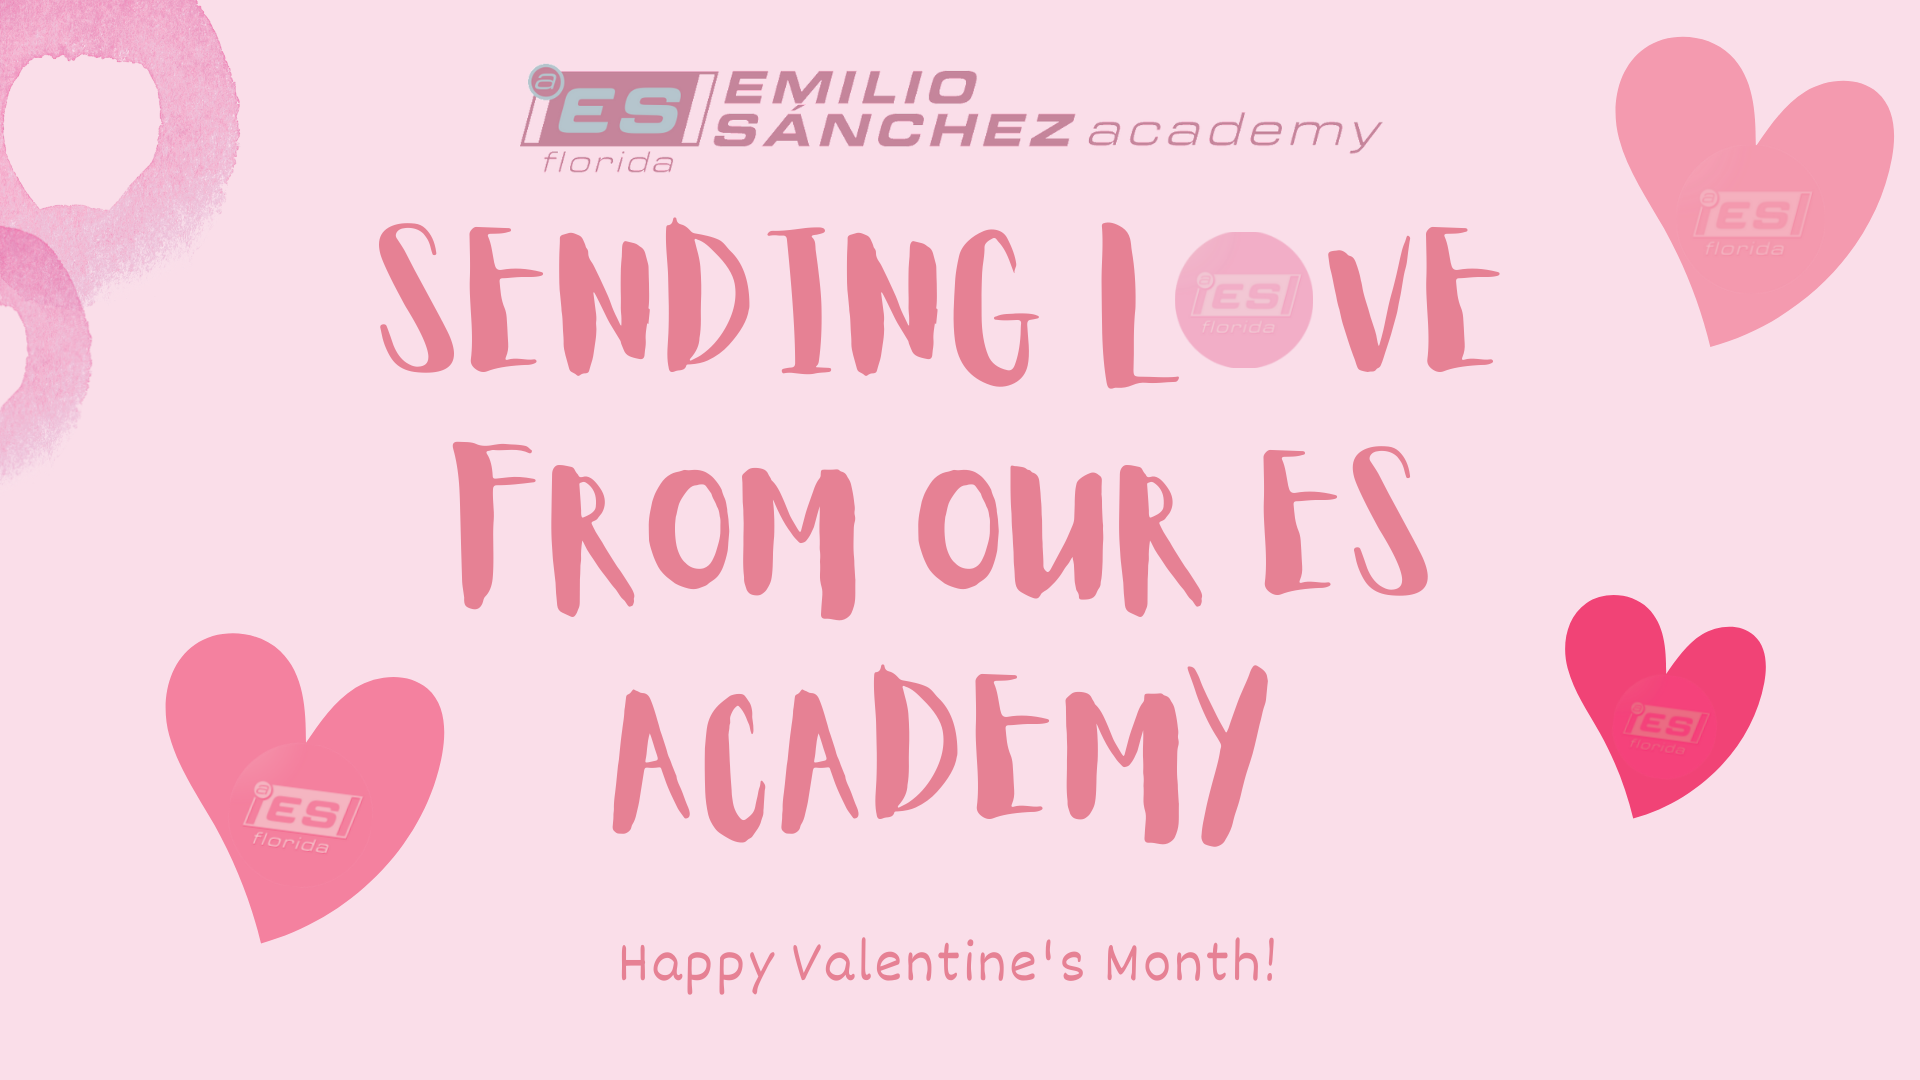 letters of love from our es academy